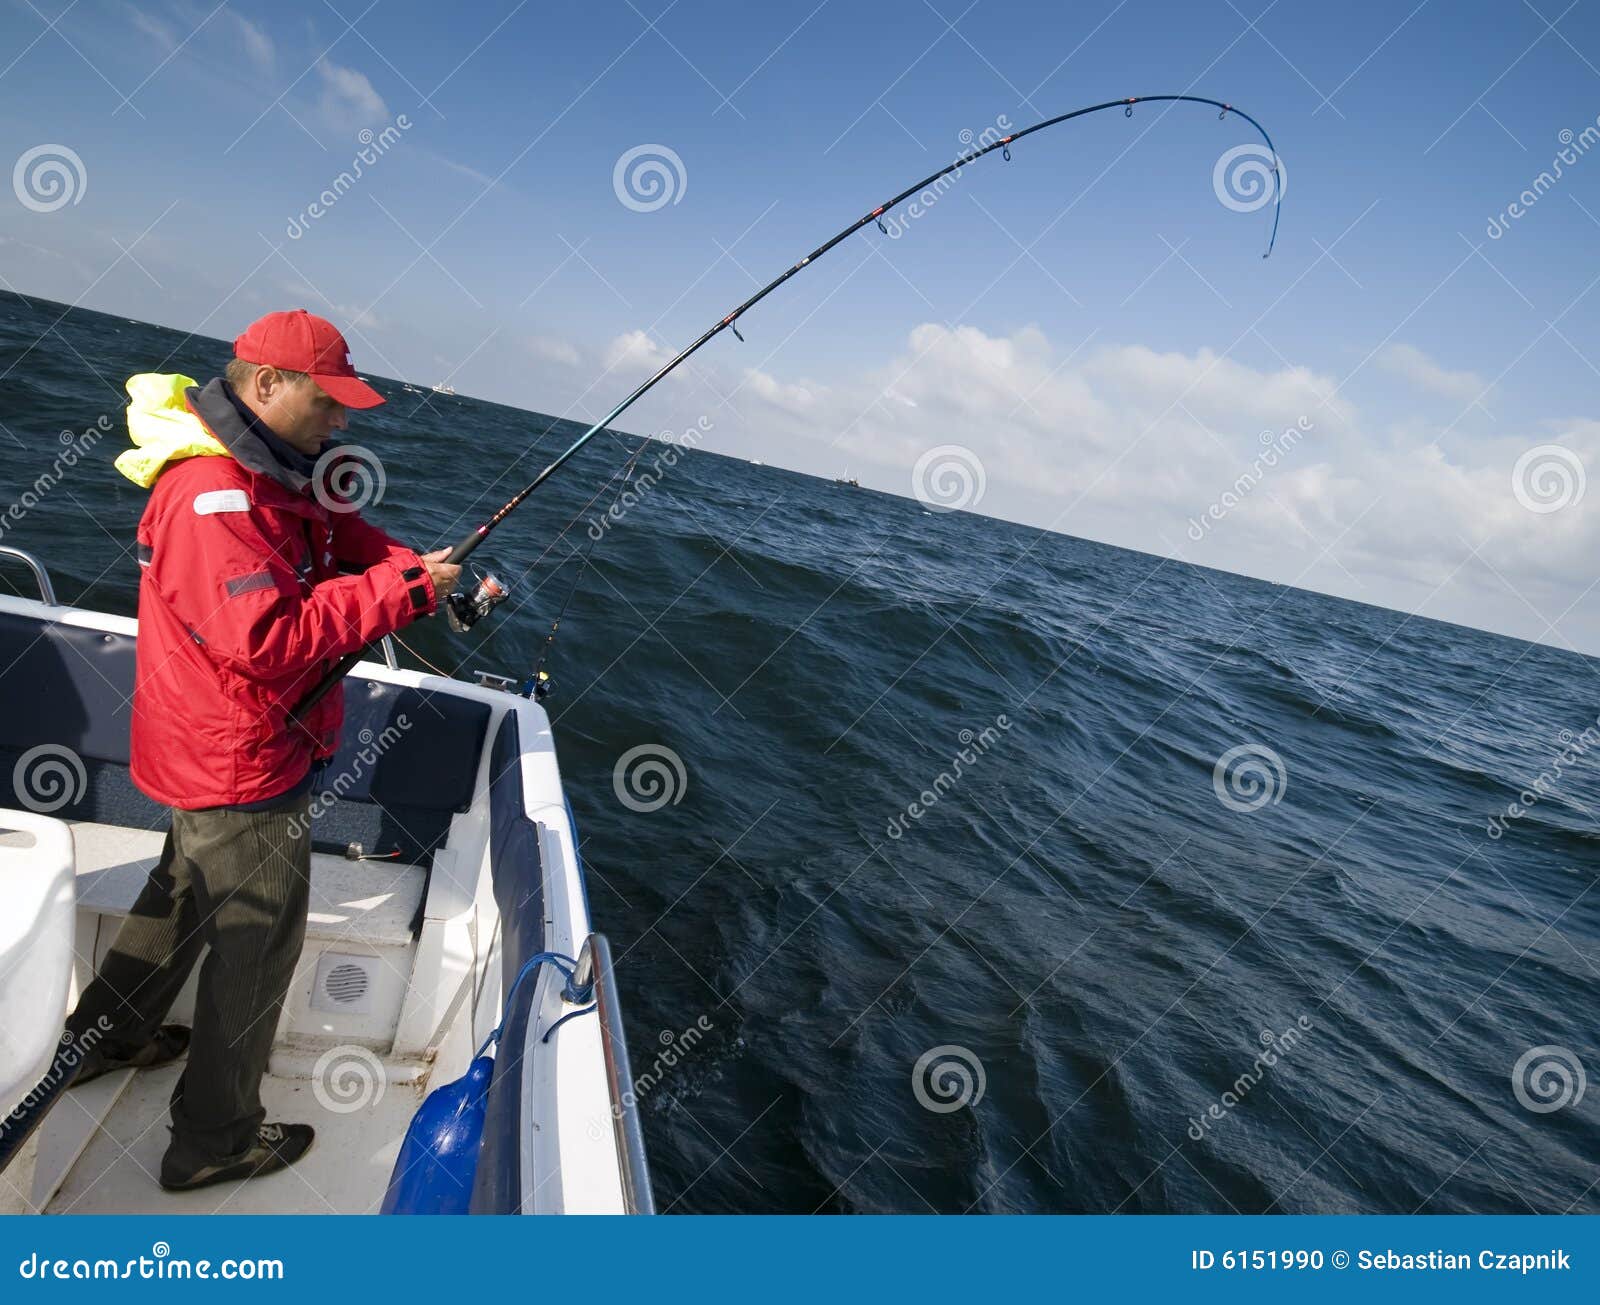 sea fishing from boat